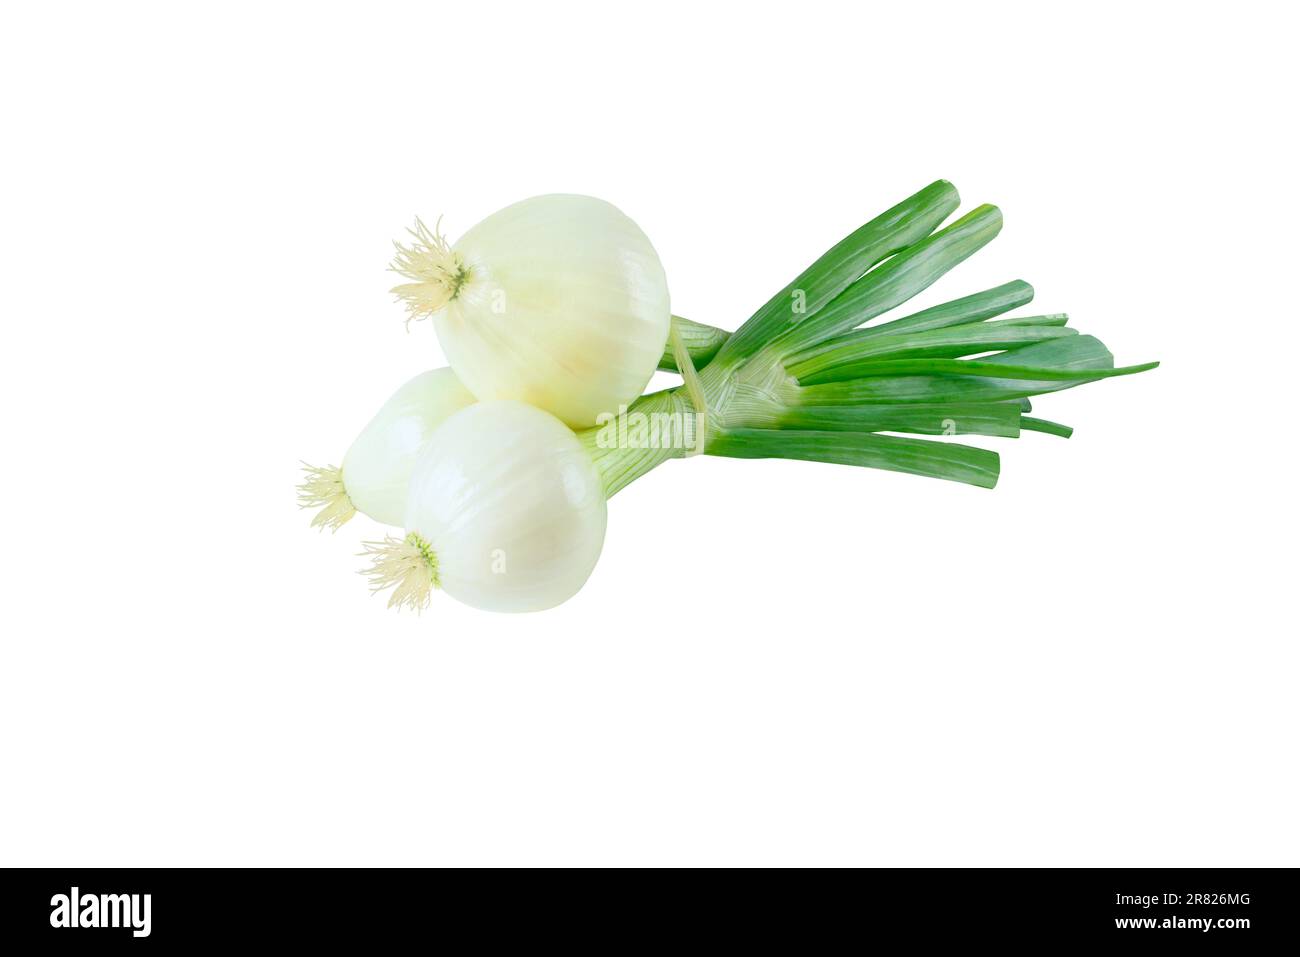 Scallions or green onions or spring onions vegetables tied bunch isolated on white. Stock Photo